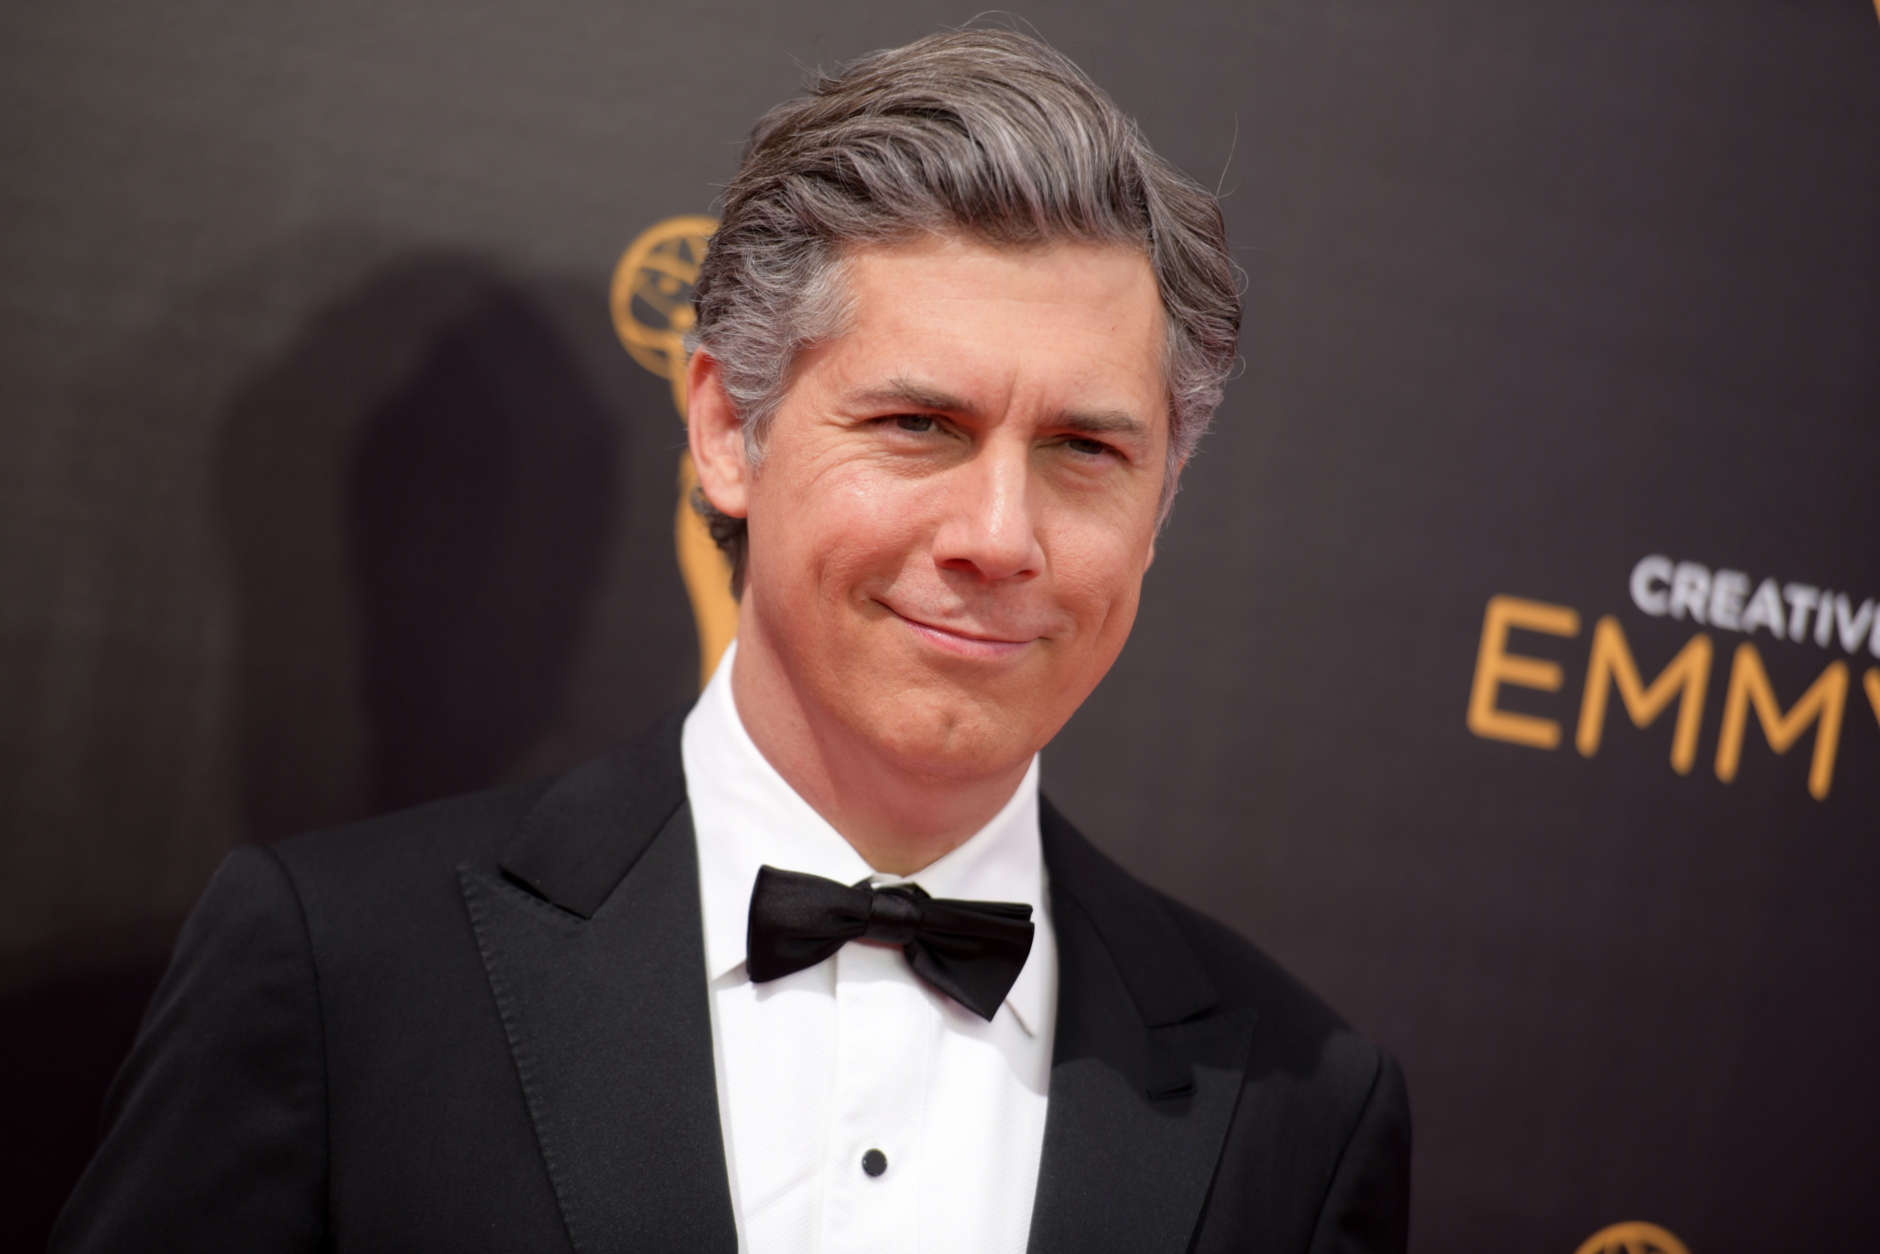 Chris Parnell arrives at night two of the Creative Arts Emmy Awards at the Microsoft Theater on Sunday, Sept. 11, 2016, in Los Angeles. (Photo by Richard Shotwell/Invision/AP)